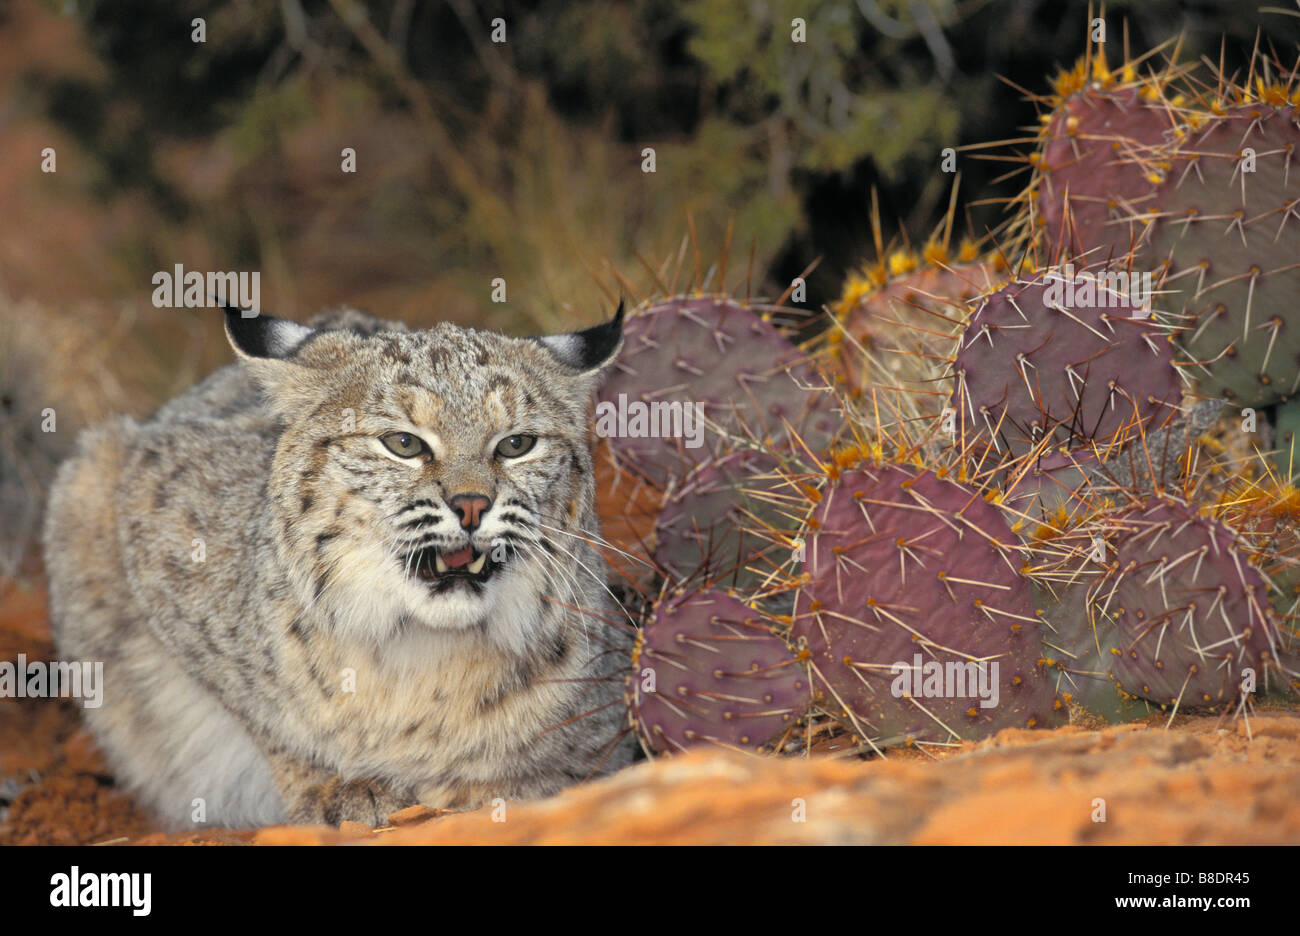 tk0447, Thomas Kitchin; Bobcat in defensive threat posture, neck lowered, ears down, Southwest USA Stock Photo